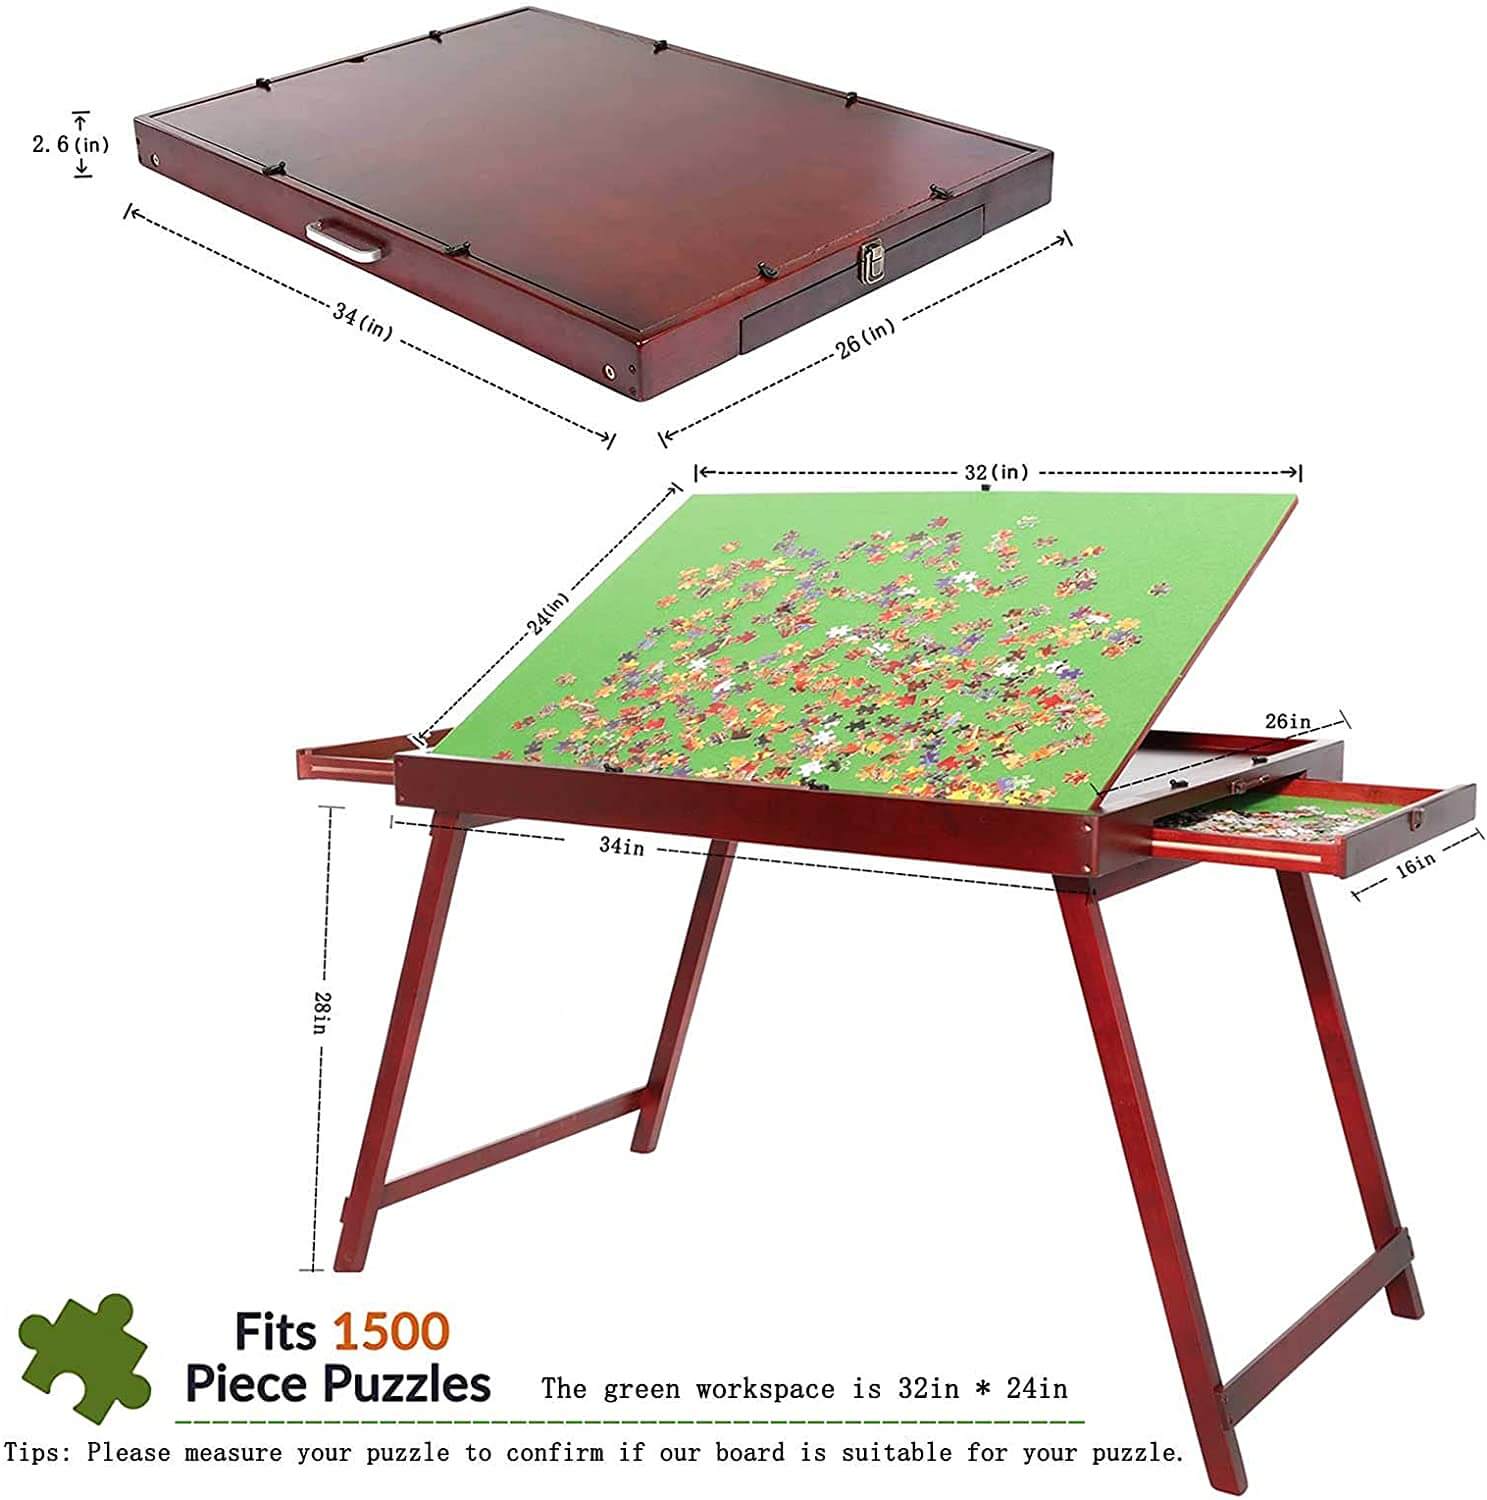 1500 piece jigsaw puzzle table with drawers & folding legs for coffee, the size of the puzzle table